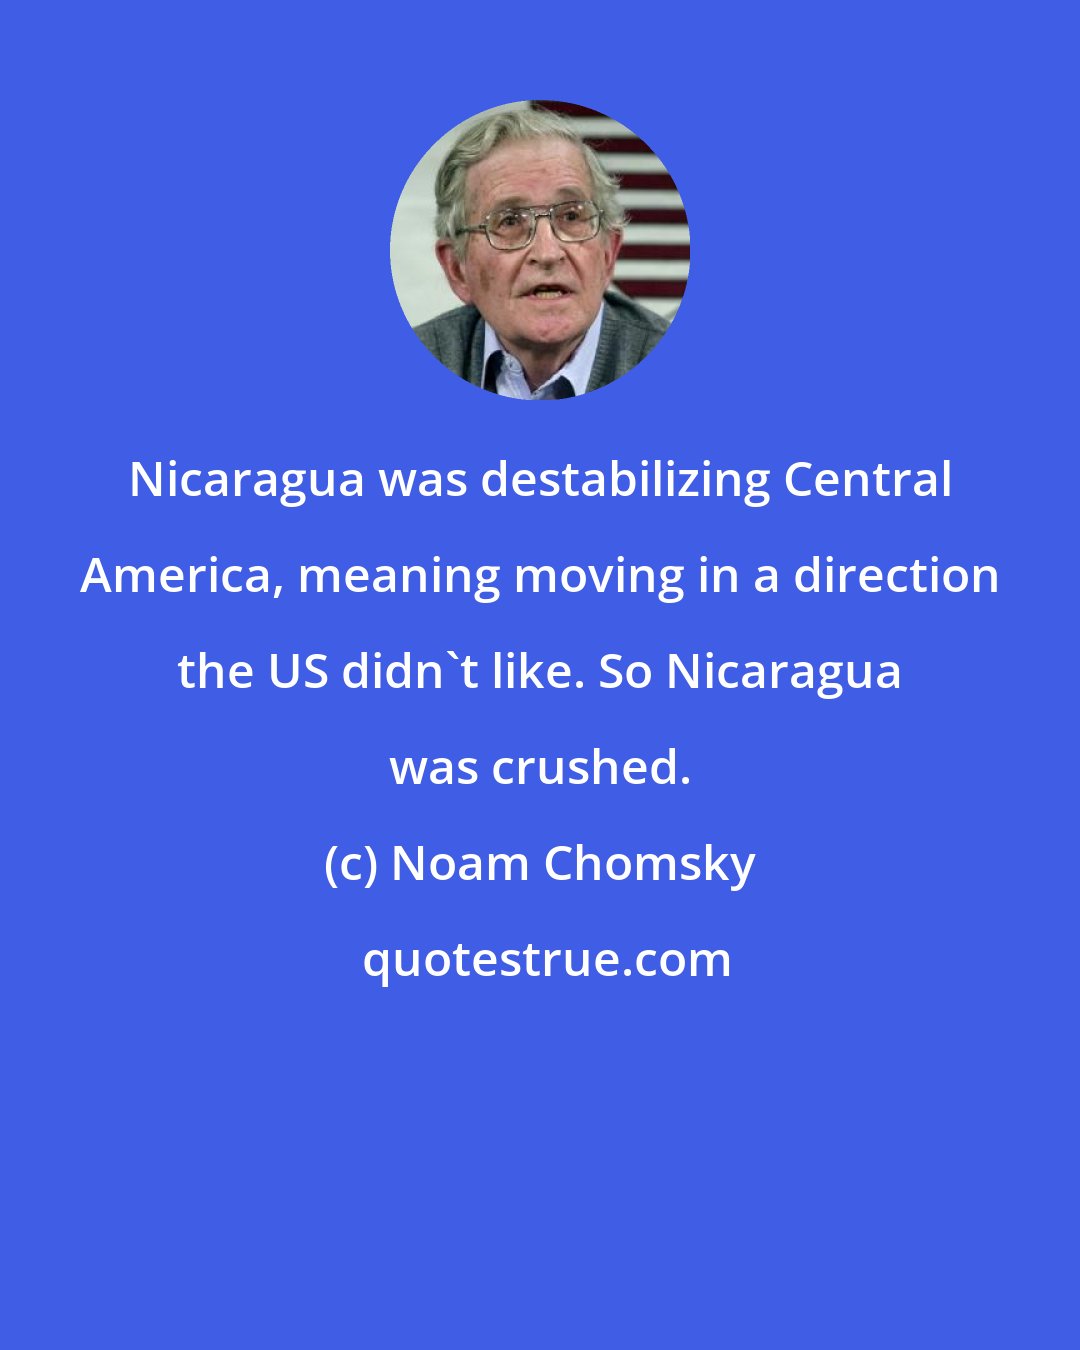 Noam Chomsky: Nicaragua was destabilizing Central America, meaning moving in a direction the US didn't like. So Nicaragua was crushed.